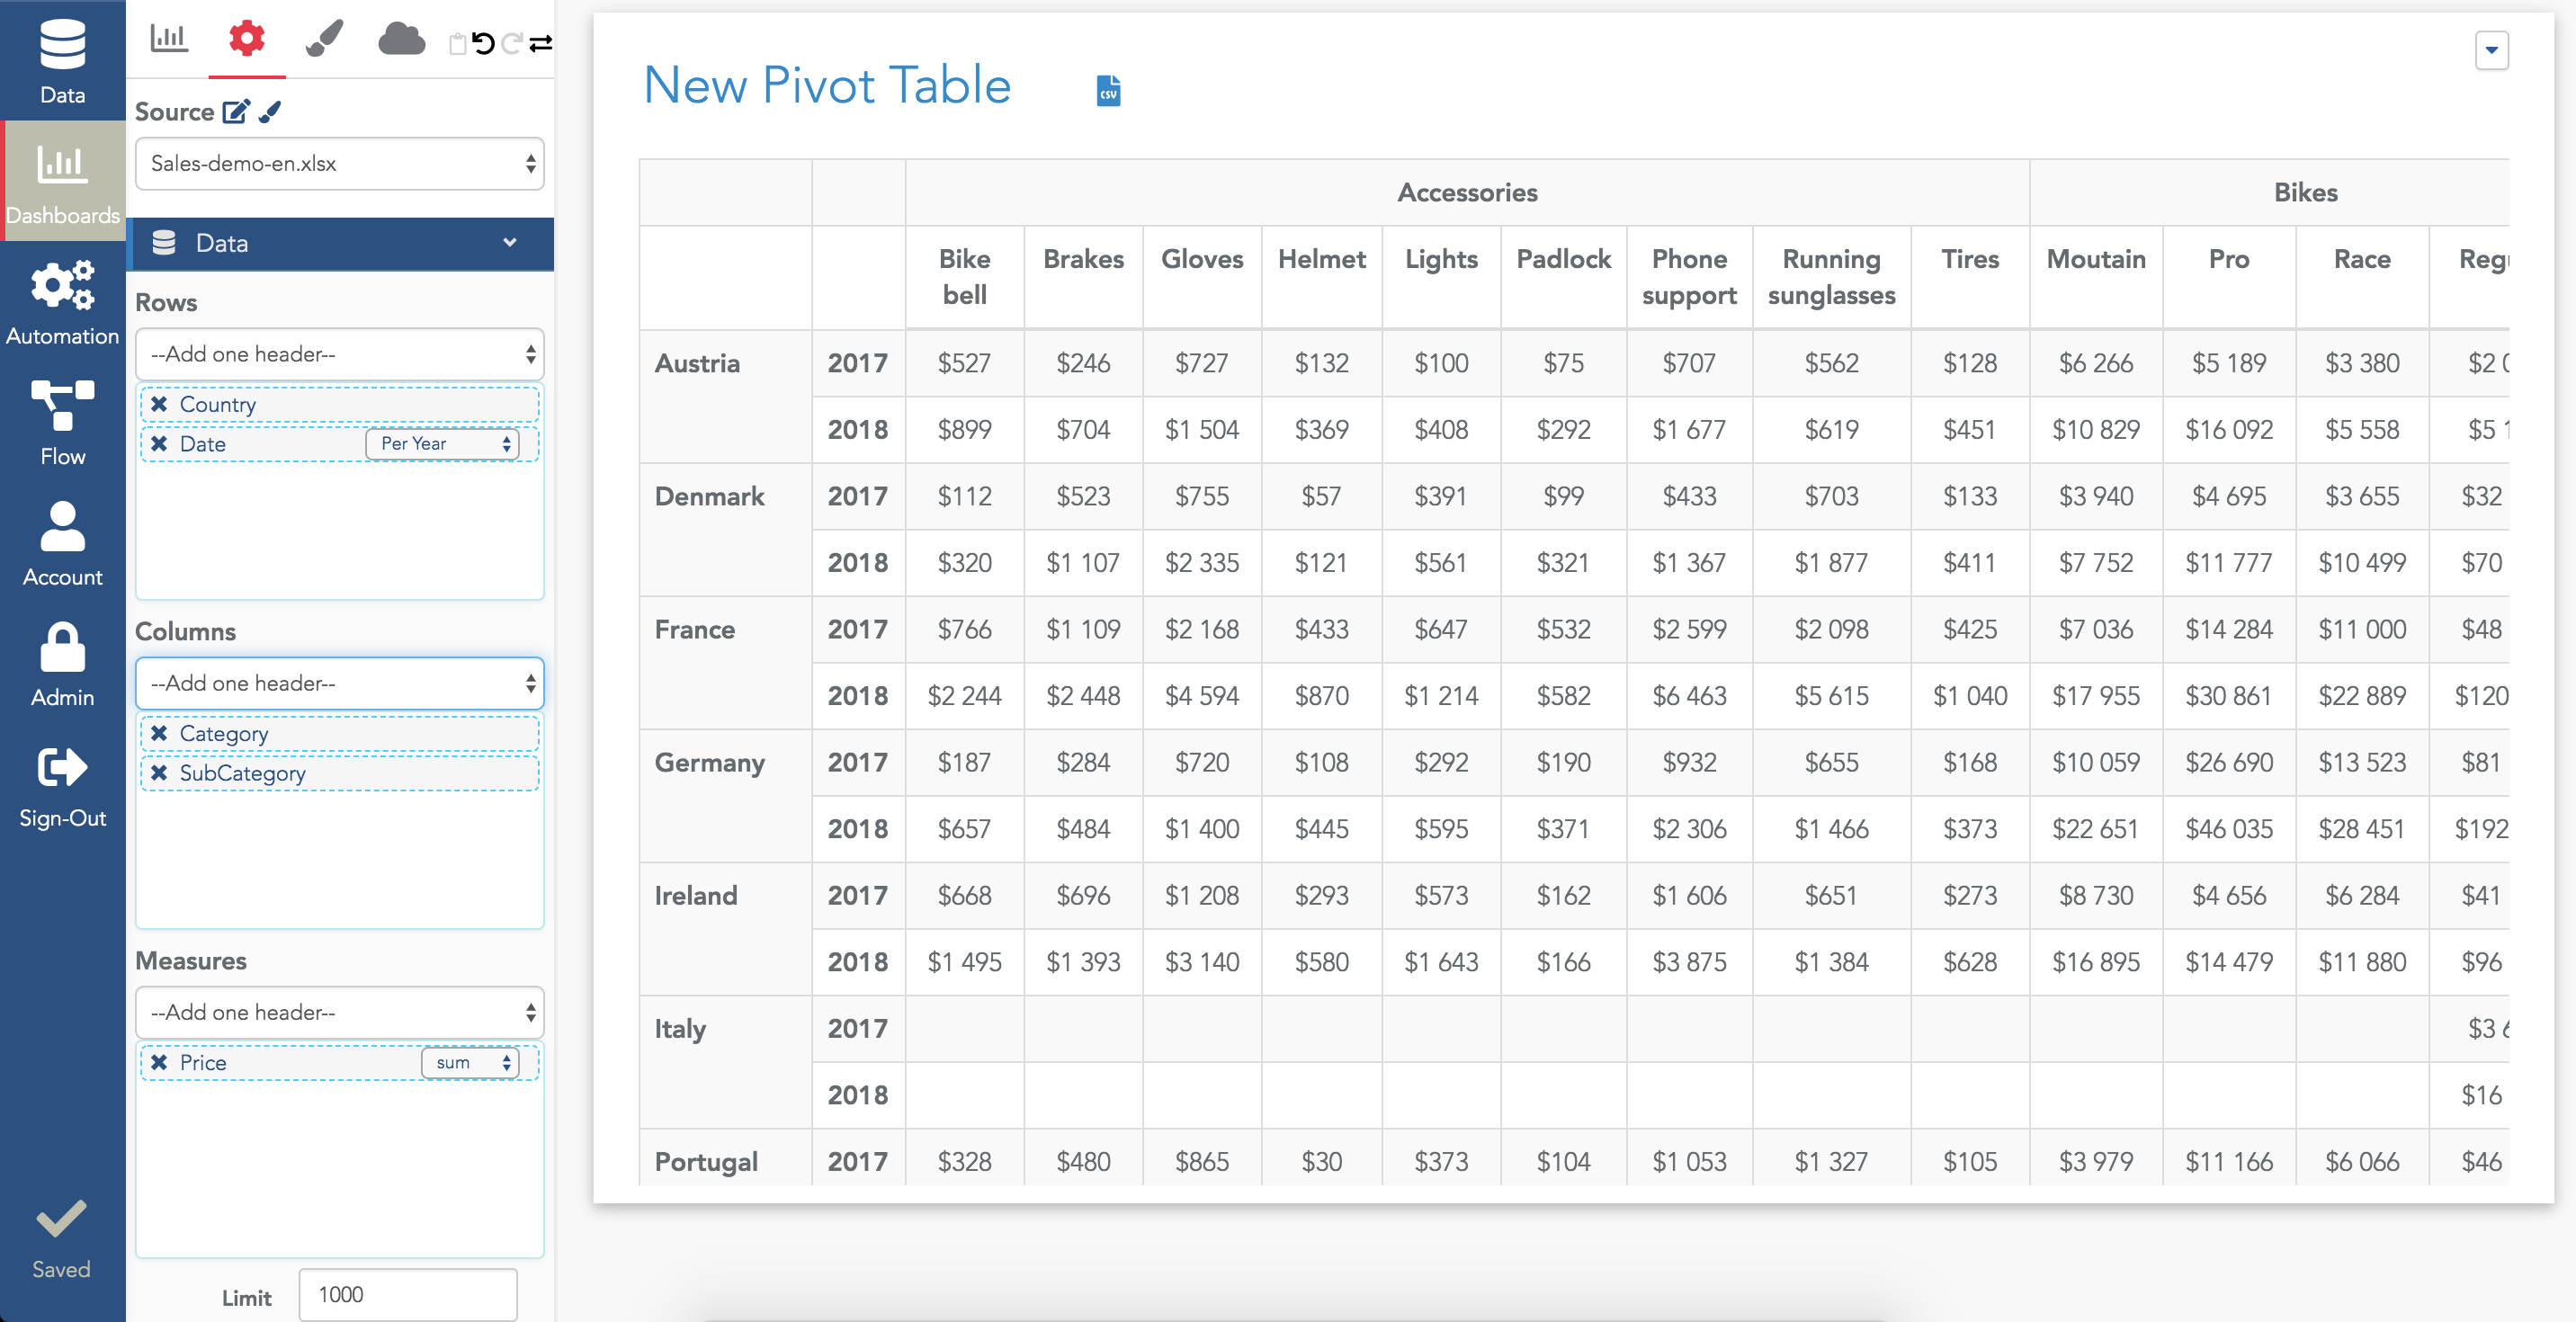 Pivot table with 4 dimensions